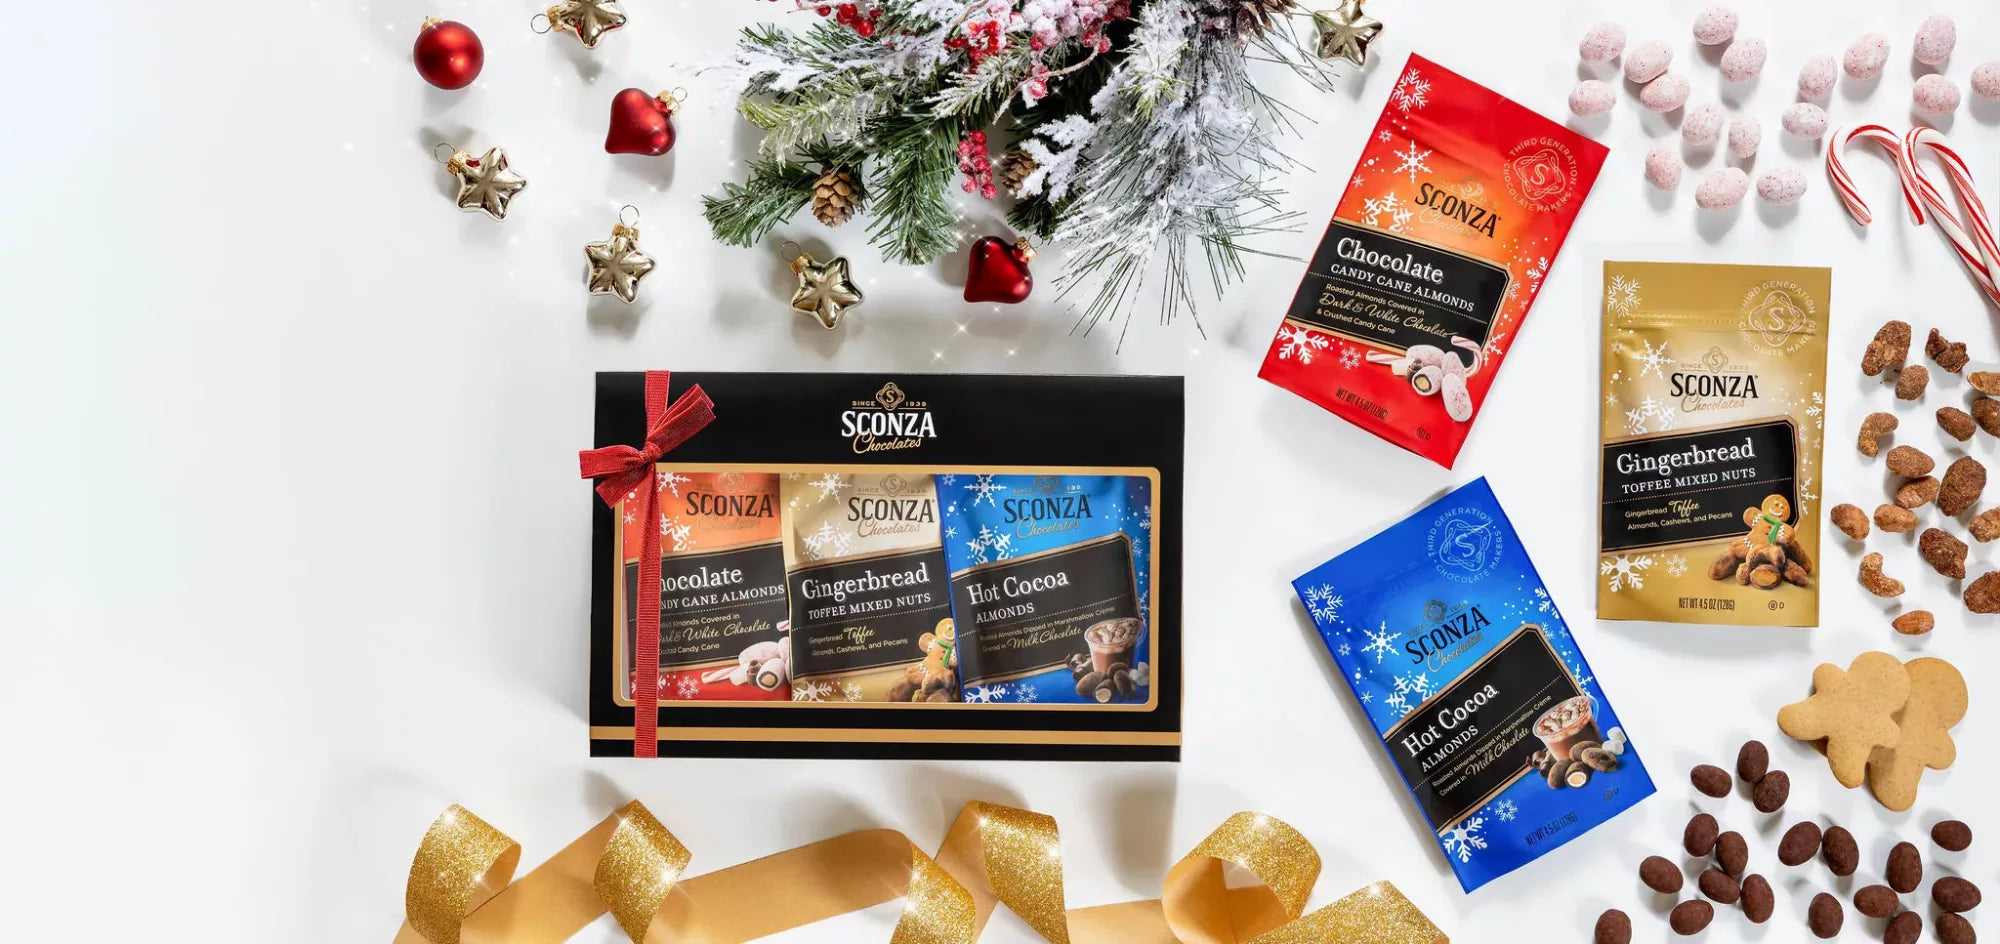 Sconza Chocolates holiday assortment featuring candy cane almonds, gingerbread mixed nuts & hot cocoa almonds.